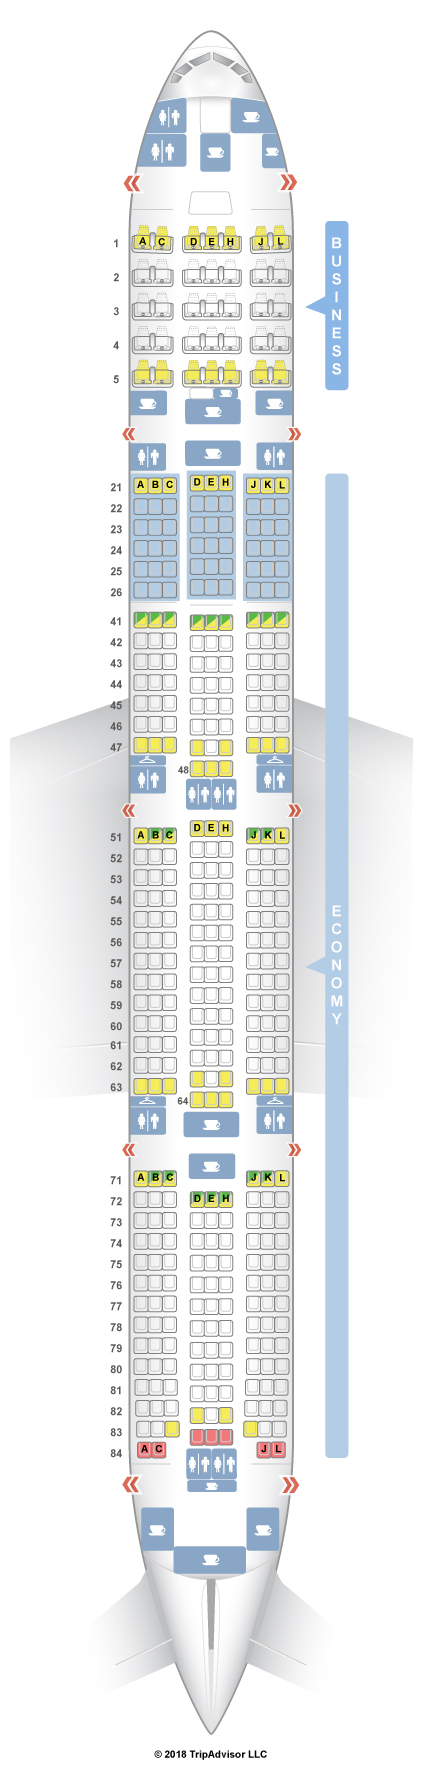 Boeing 777 300er Cathay Pacific Seating Chart